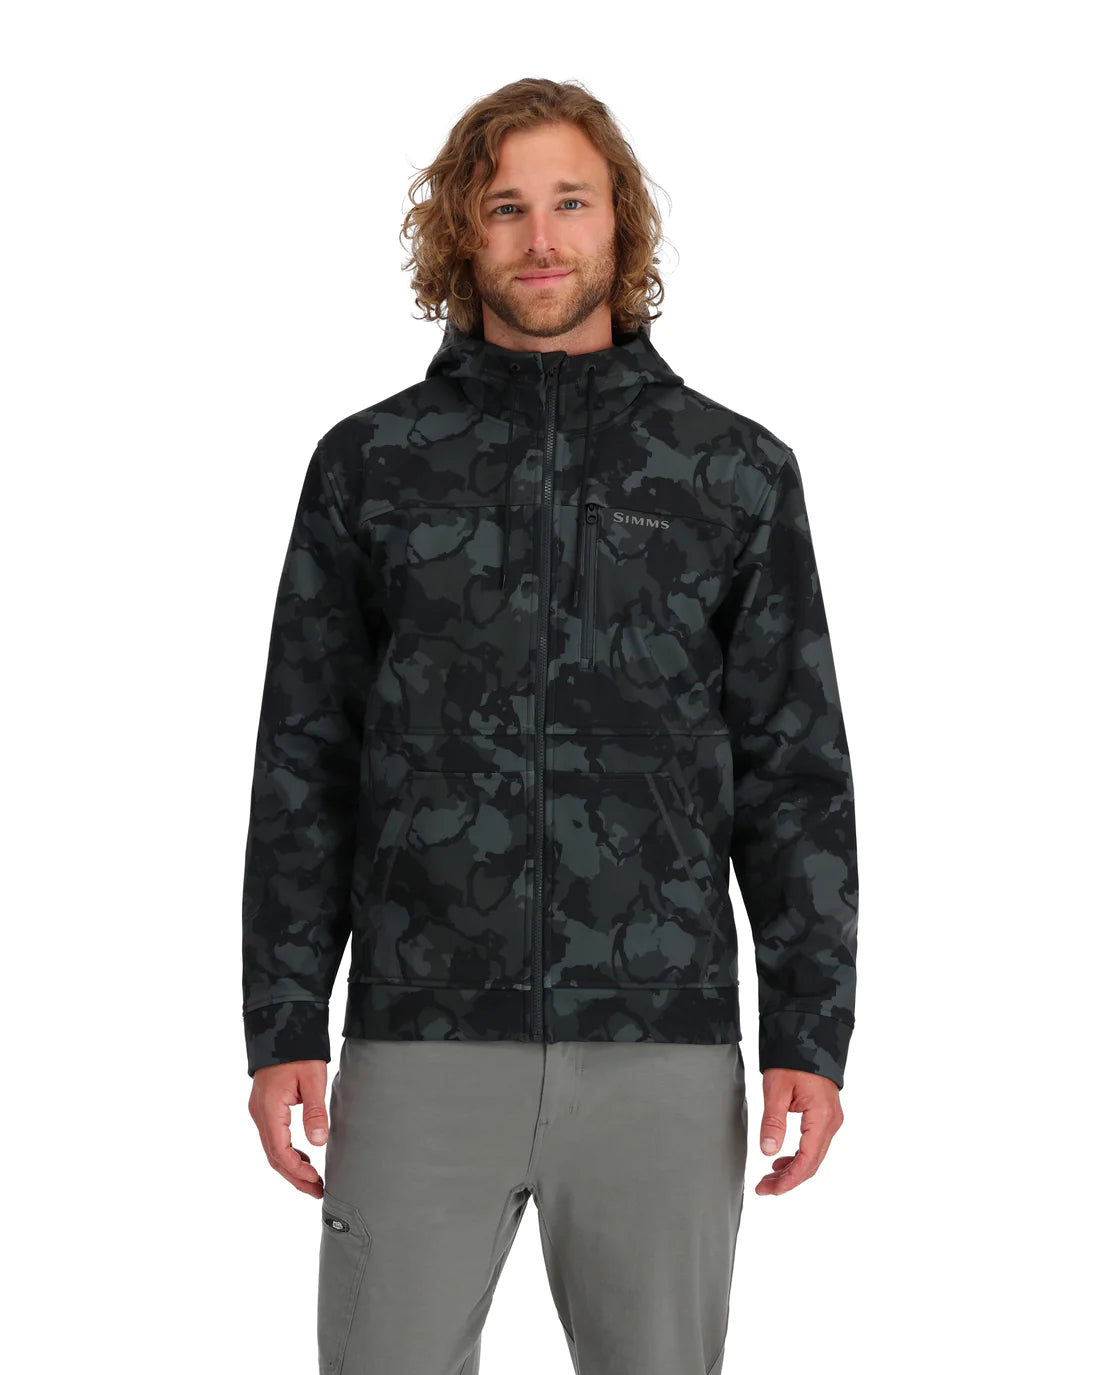 Simms M's Rogue Hoody - Regiment Camo Carbon - Compleat Angler